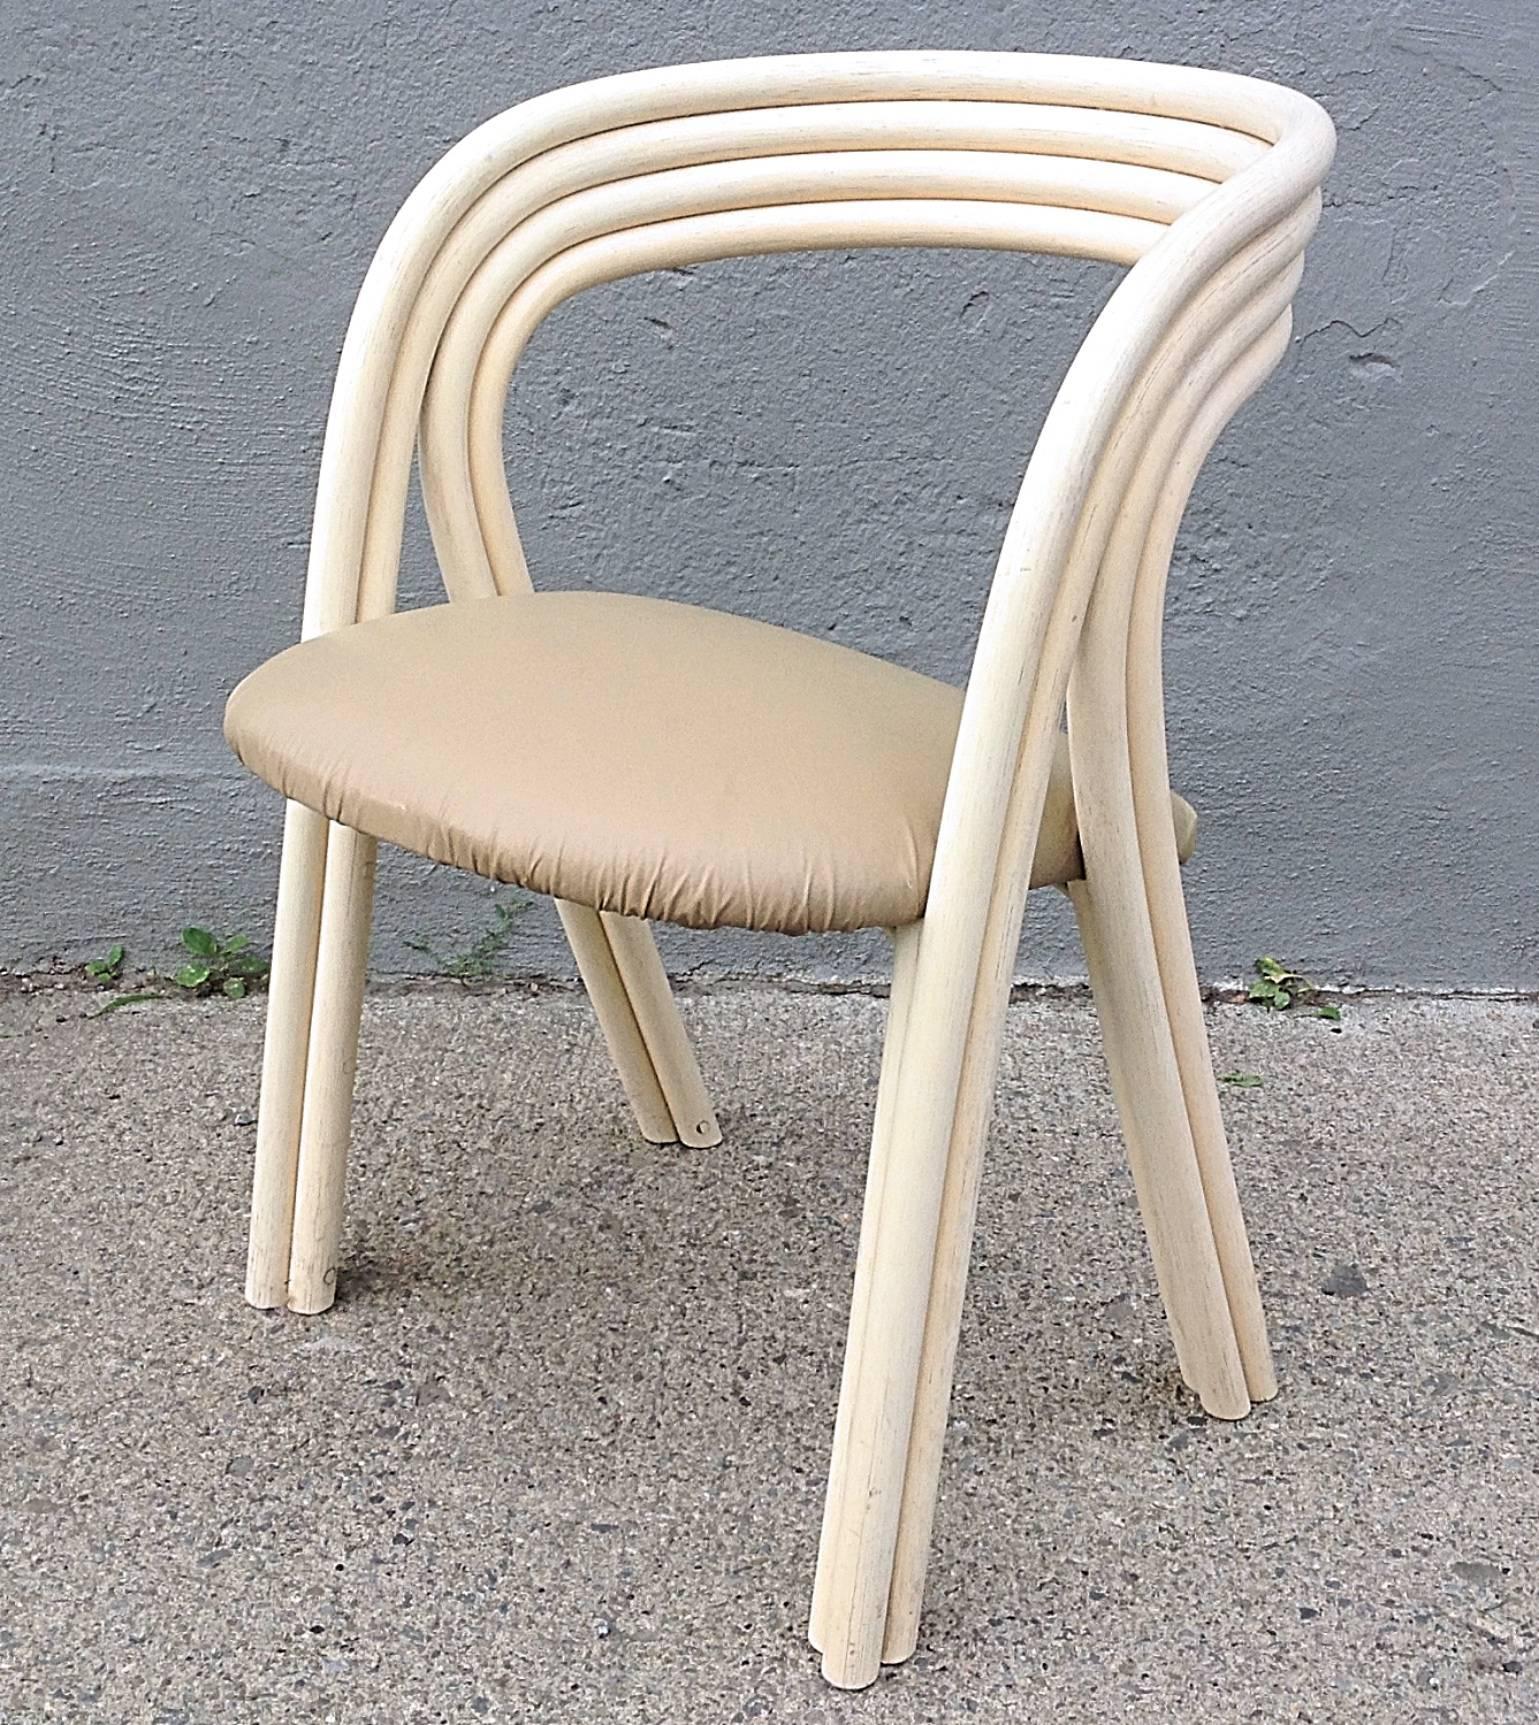 Fantastic set of bent bamboo with internet steel skeleton for strength, Rohe Noordwolde, circa 1970s. Glazed cream finish.